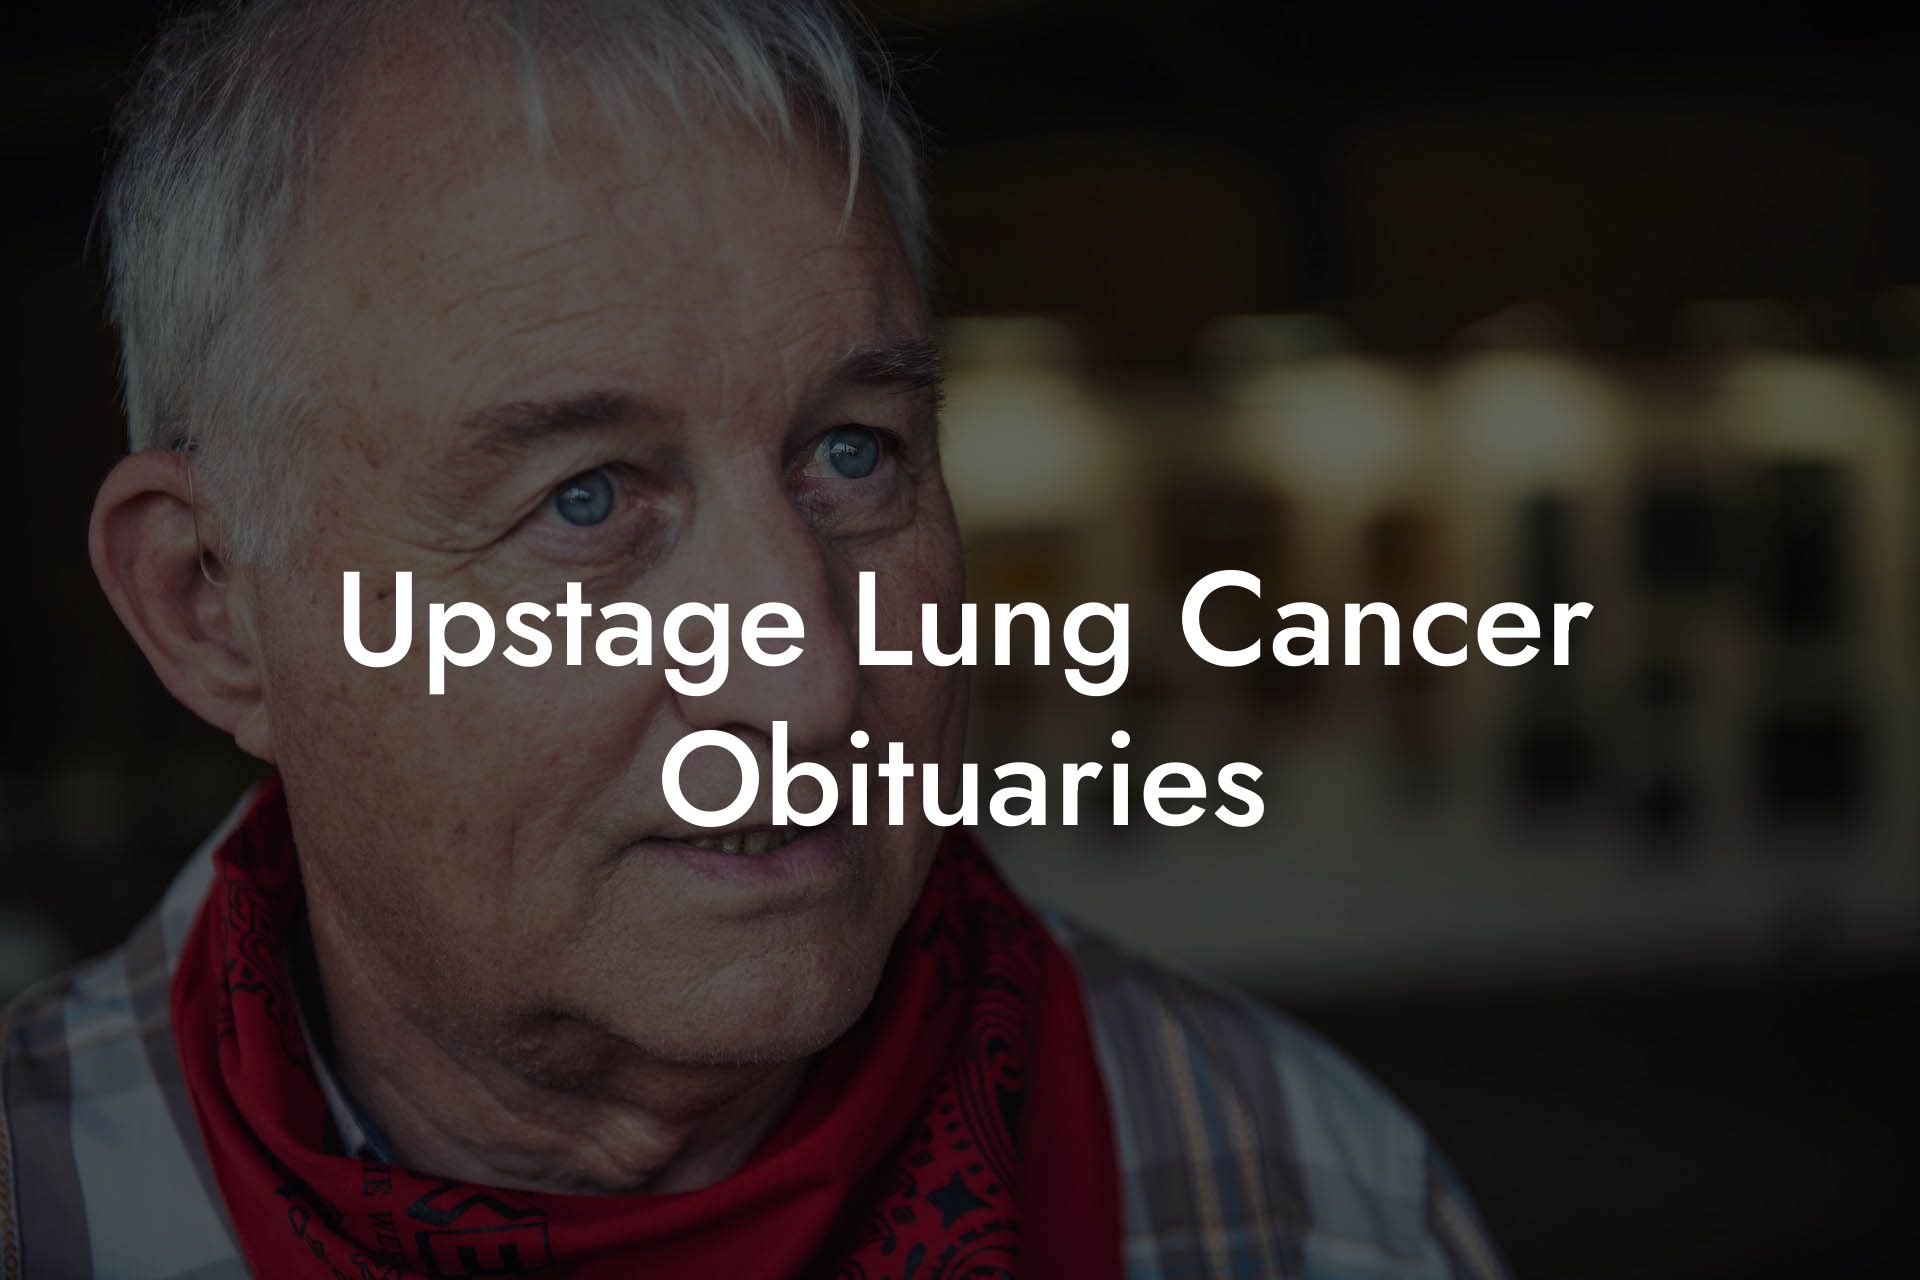 Upstage Lung Cancer Obituaries